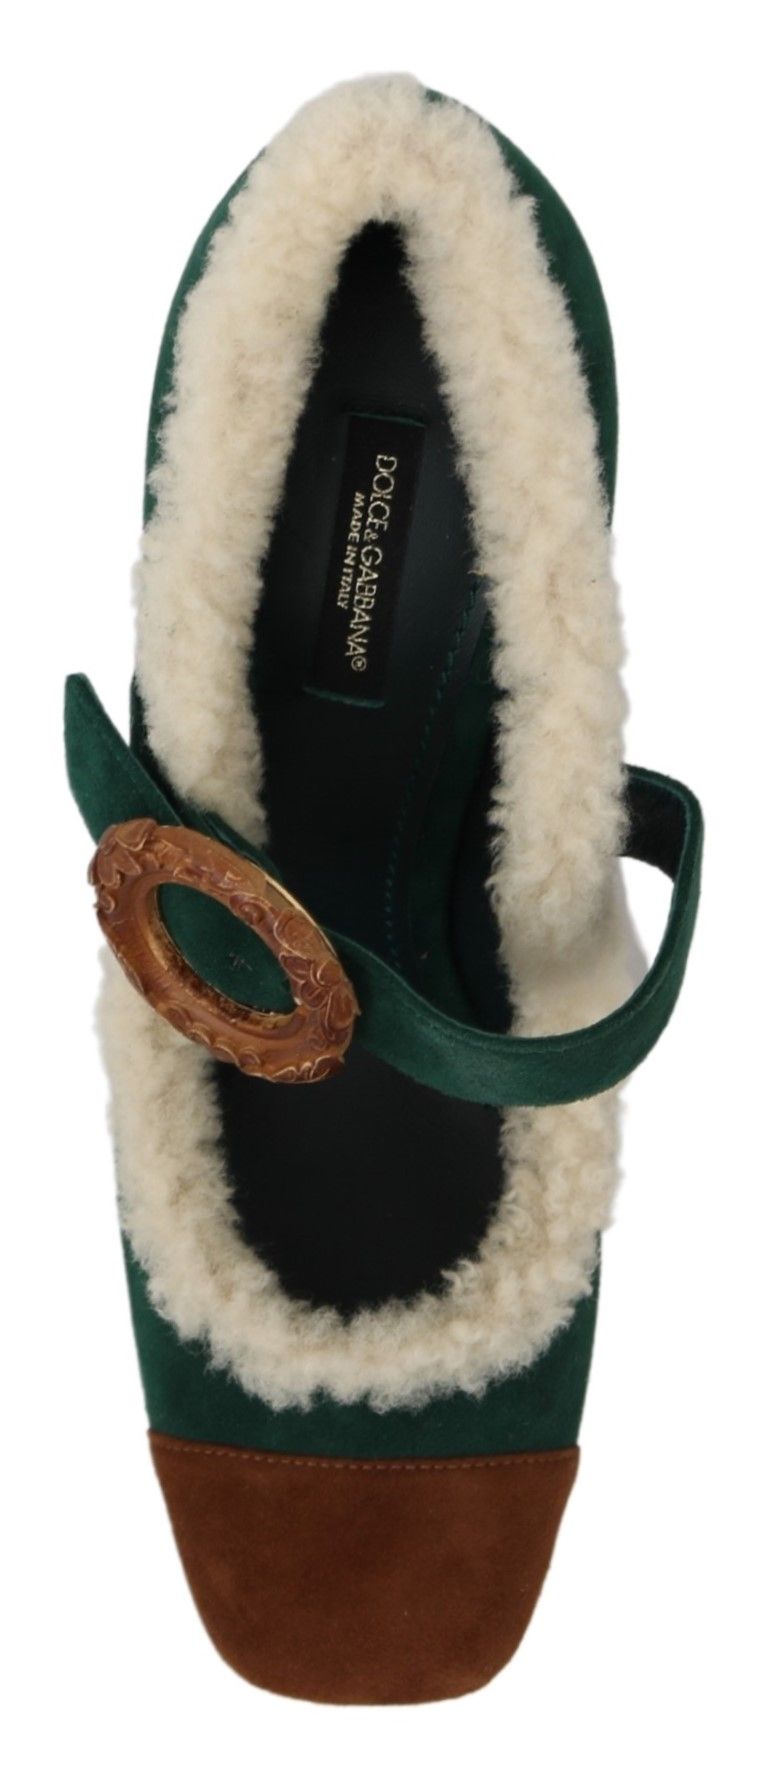 Dolce & Gabbana Chic Green Suede Mary Janes with Shearling Trim